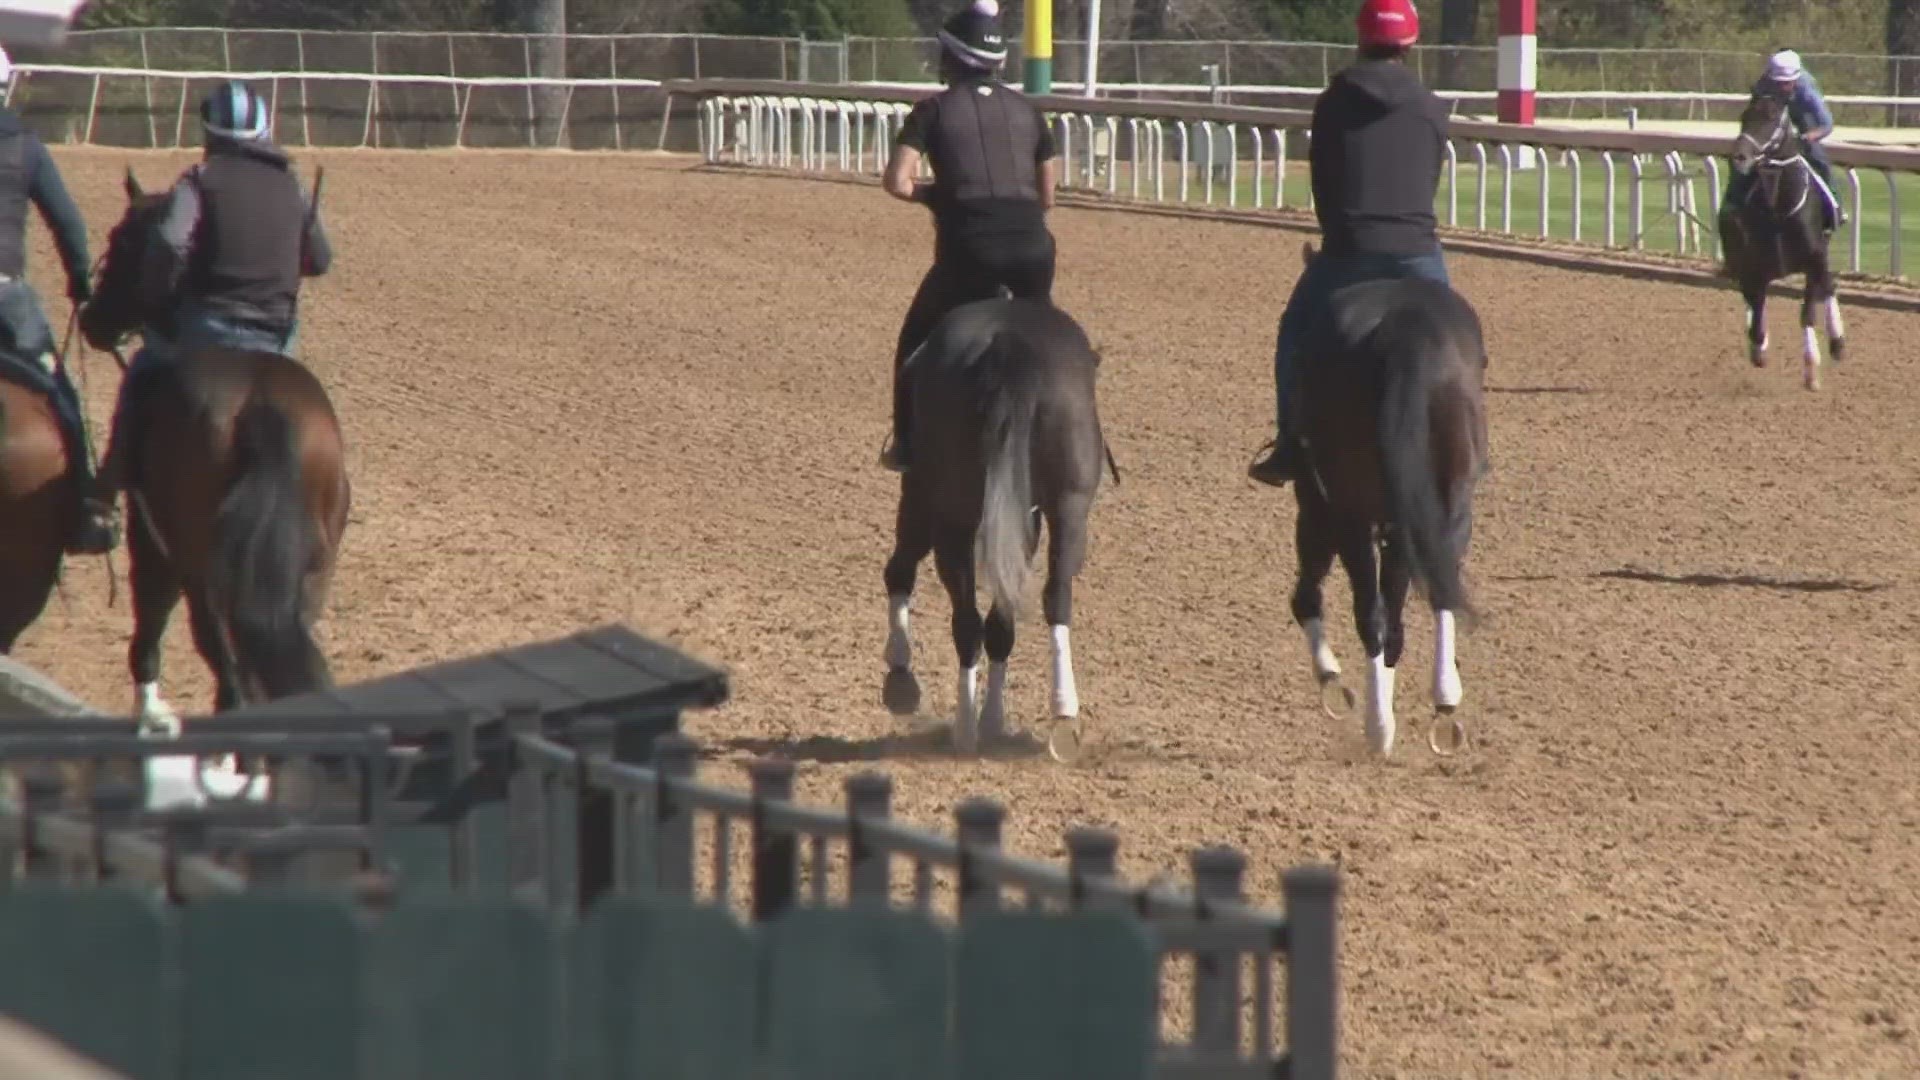 Huge crowds are expected at Oaklawn on Saturday for both the derby and four-stakes race this weekend. Here's what you can expect at the race track.